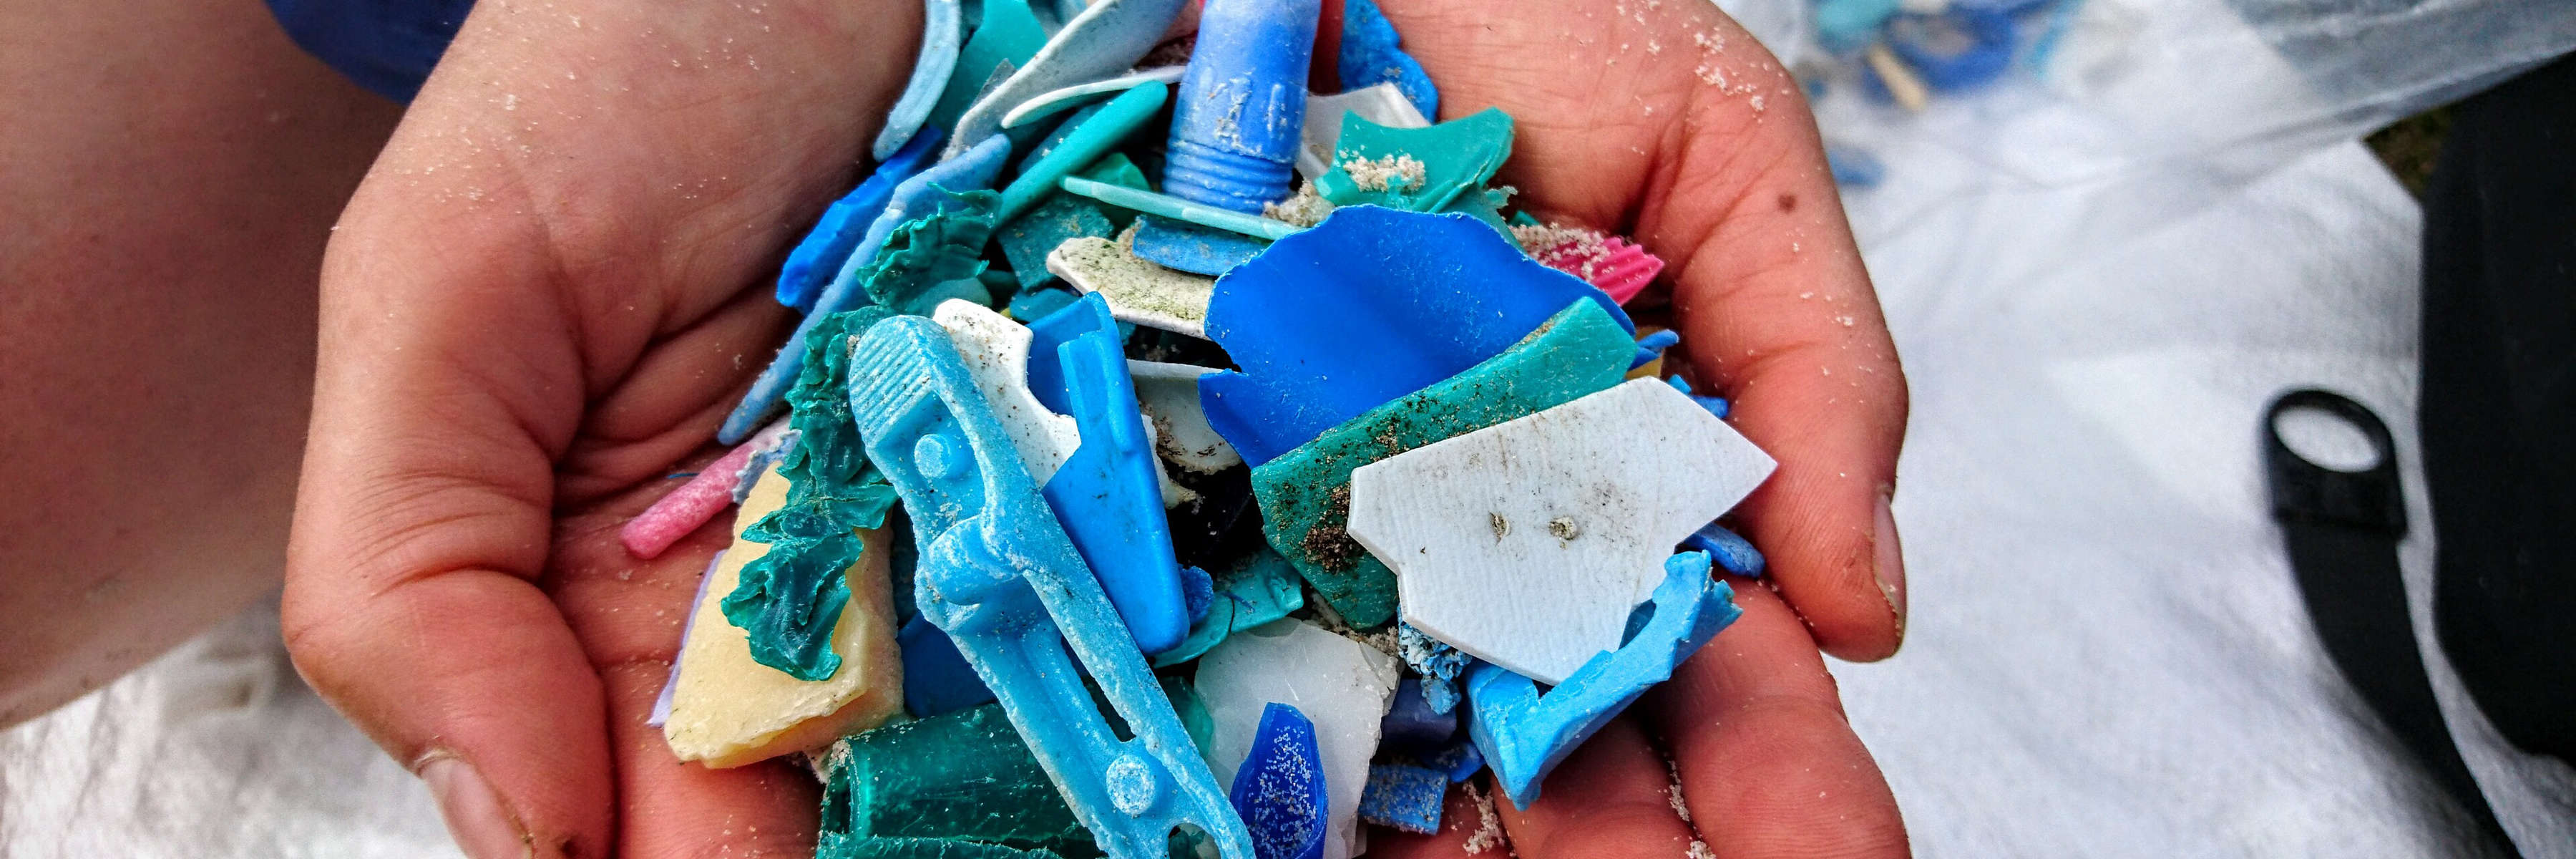 Two hands hold a pile of plastic pieces collected from the beach for a Coast Watchers coastal clean up. Photo: Andrew Hughes.